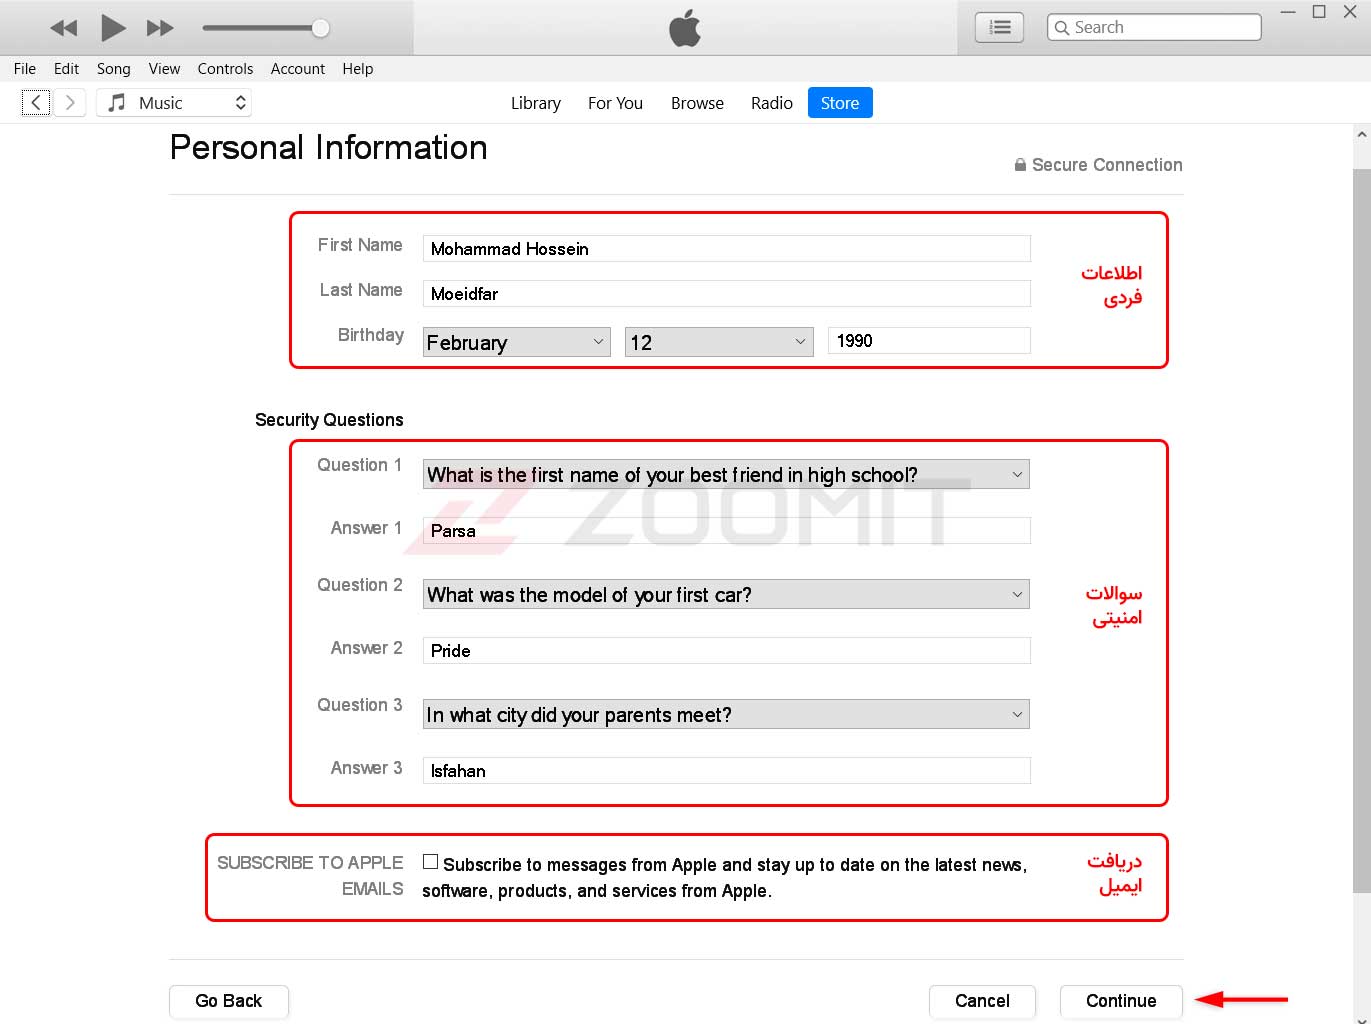 Steps to create an Apple ID using iTunes 6